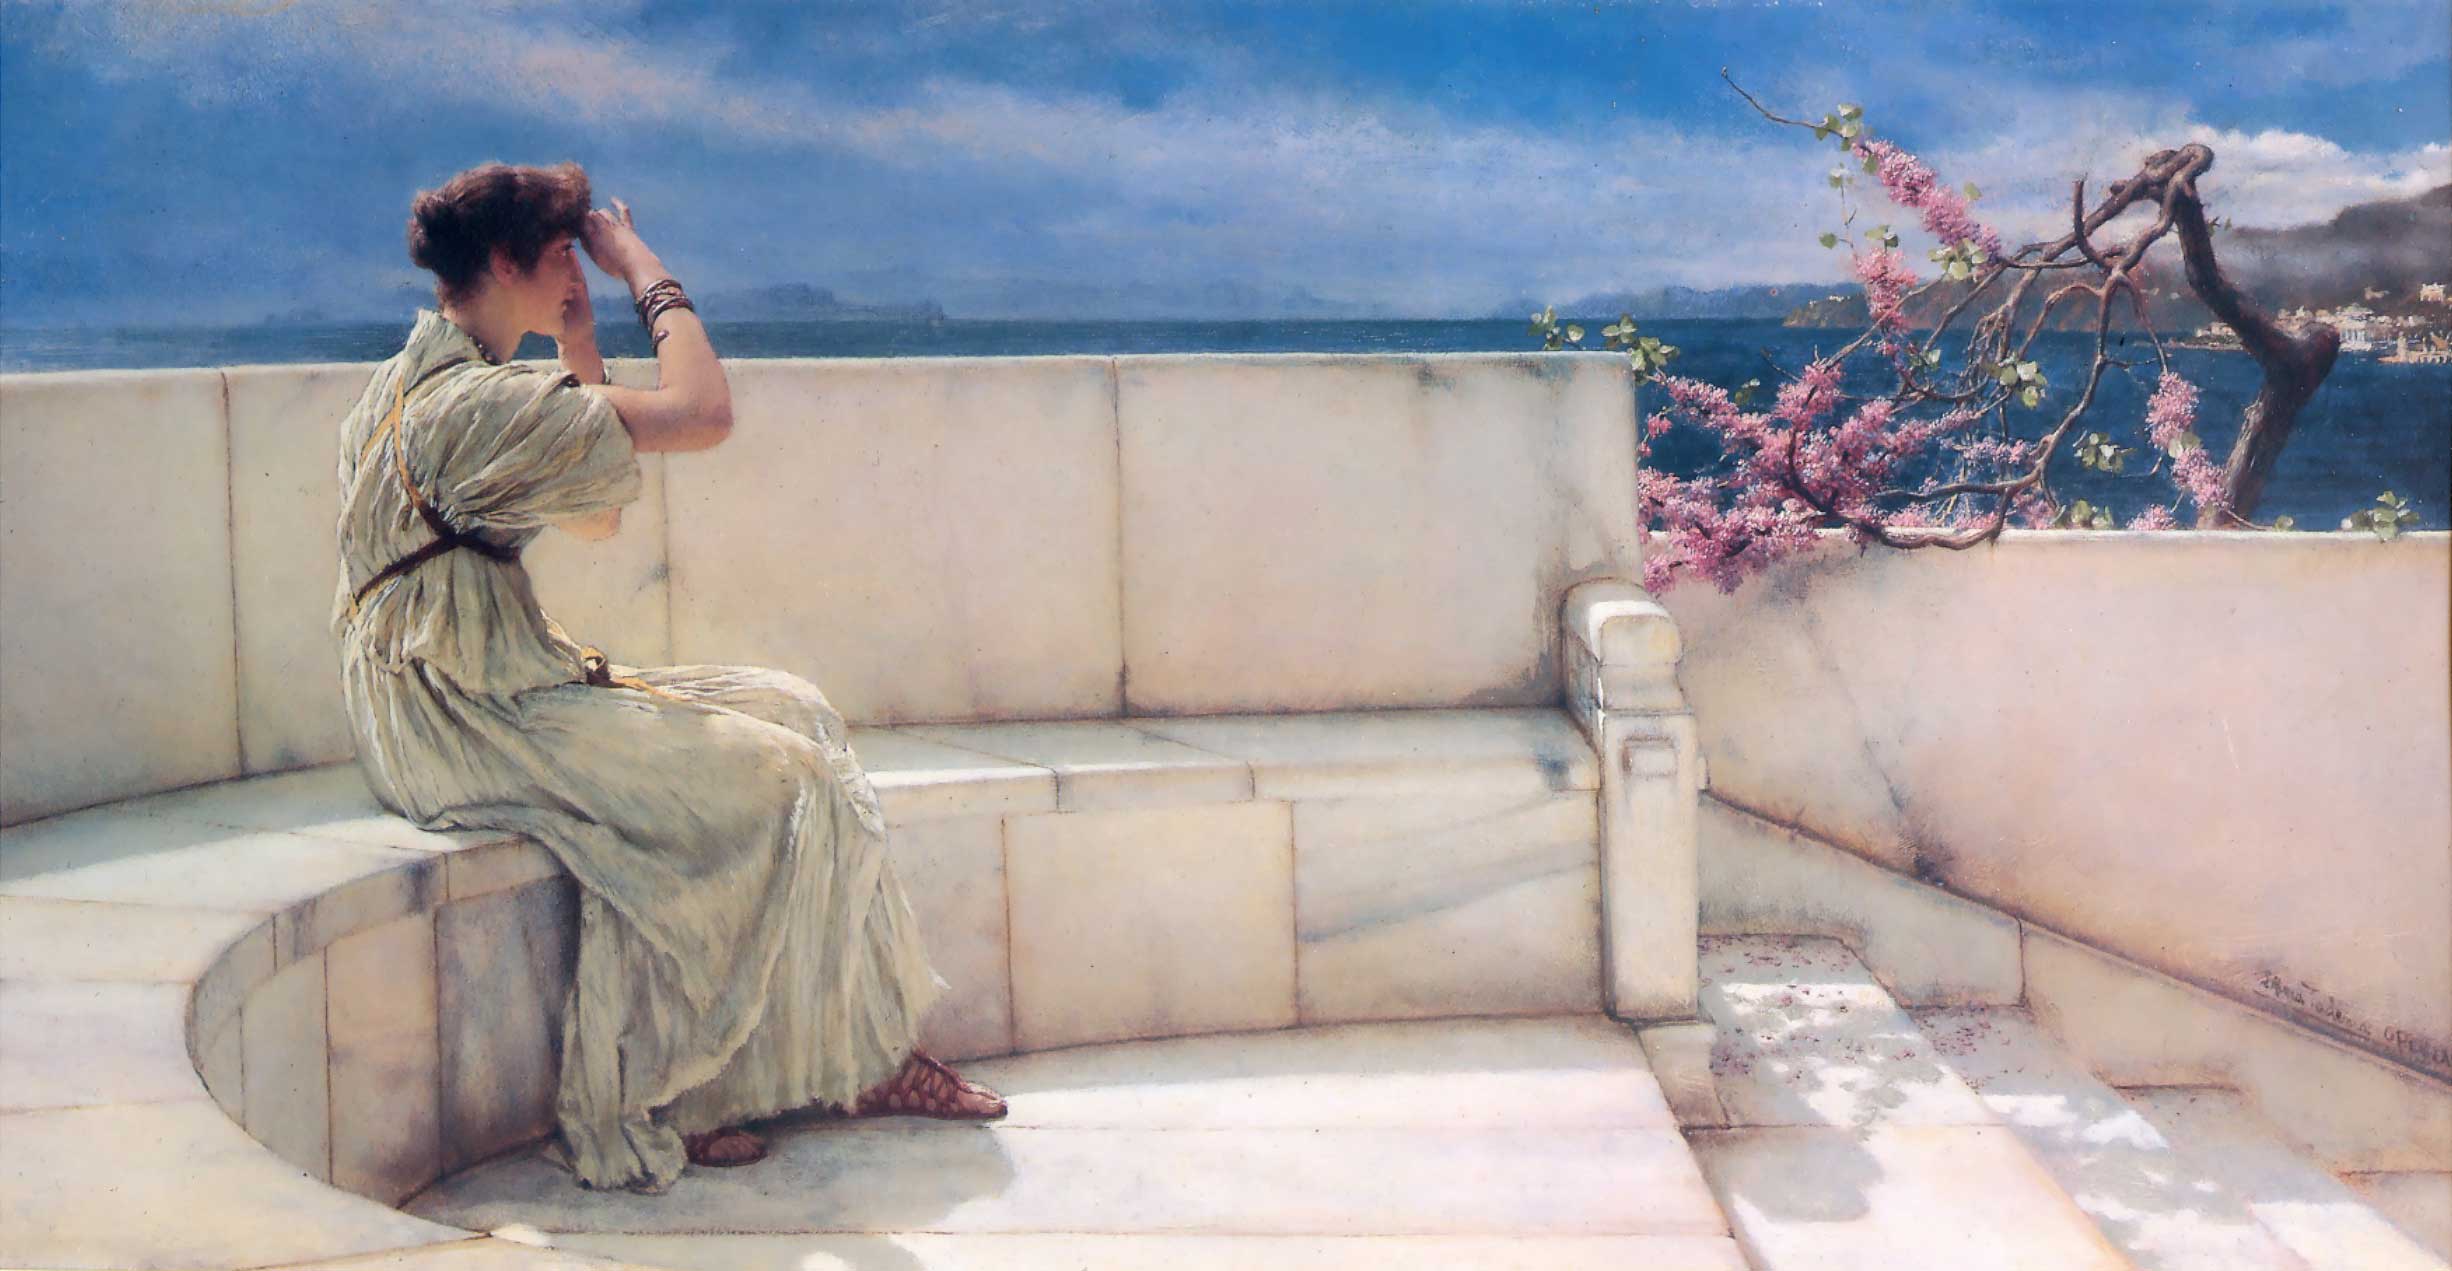 Expectations by Lawrence Alma-Tadema - 1885 -  45 x 66.1 cm private collection